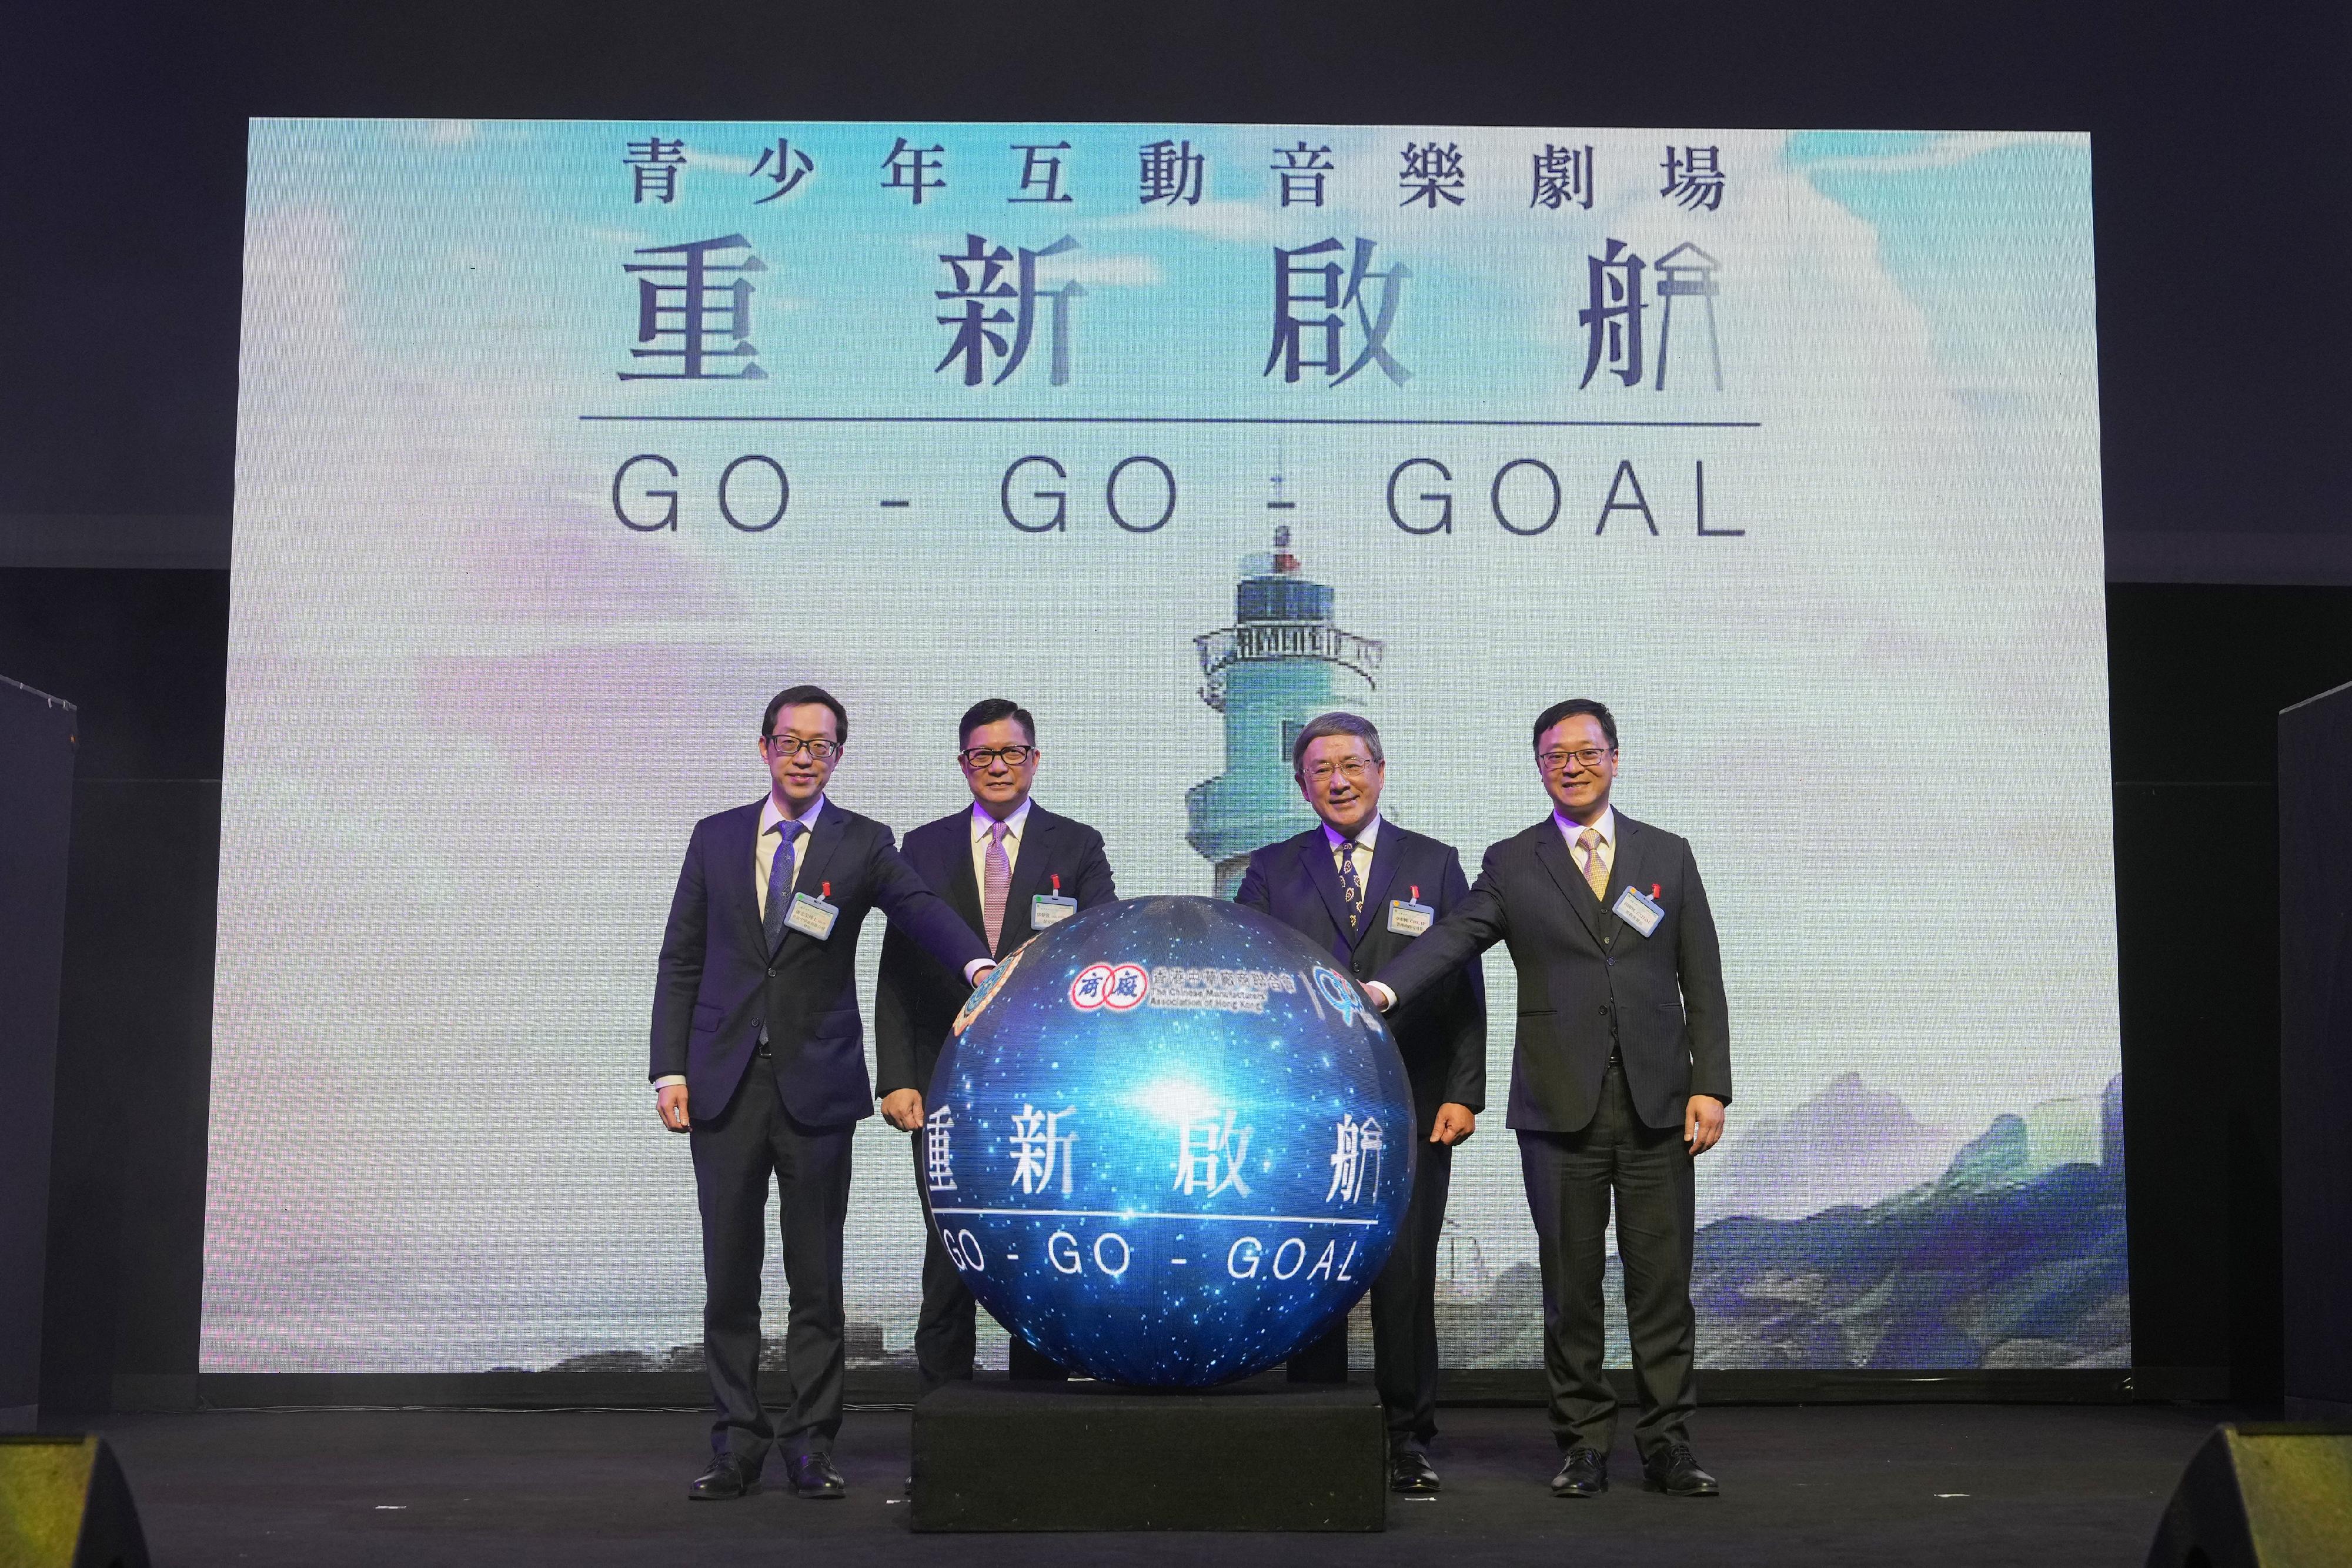 The Correctional Services Department and the Chinese Manufacturers' Association of Hong Kong jointly organised a youth musical drama, “Life Revitalisation Go Go Goal!”, at Queen Elizabeth Stadium today (January 26) to promote law-abiding and rehabilitation messages. Photo shows the Acting Chief Secretary for Administration, Mr Cheuk Wing-hing (second right); the Secretary for Security, Mr Tang Ping-keung (second left); the Commissioner of Correctional Services, Mr Wong Kwok-hing (first right); and the President of the Chinese Manufacturers' Association of Hong Kong, Dr Wingco Lo (first left), officiating at the opening ceremony.